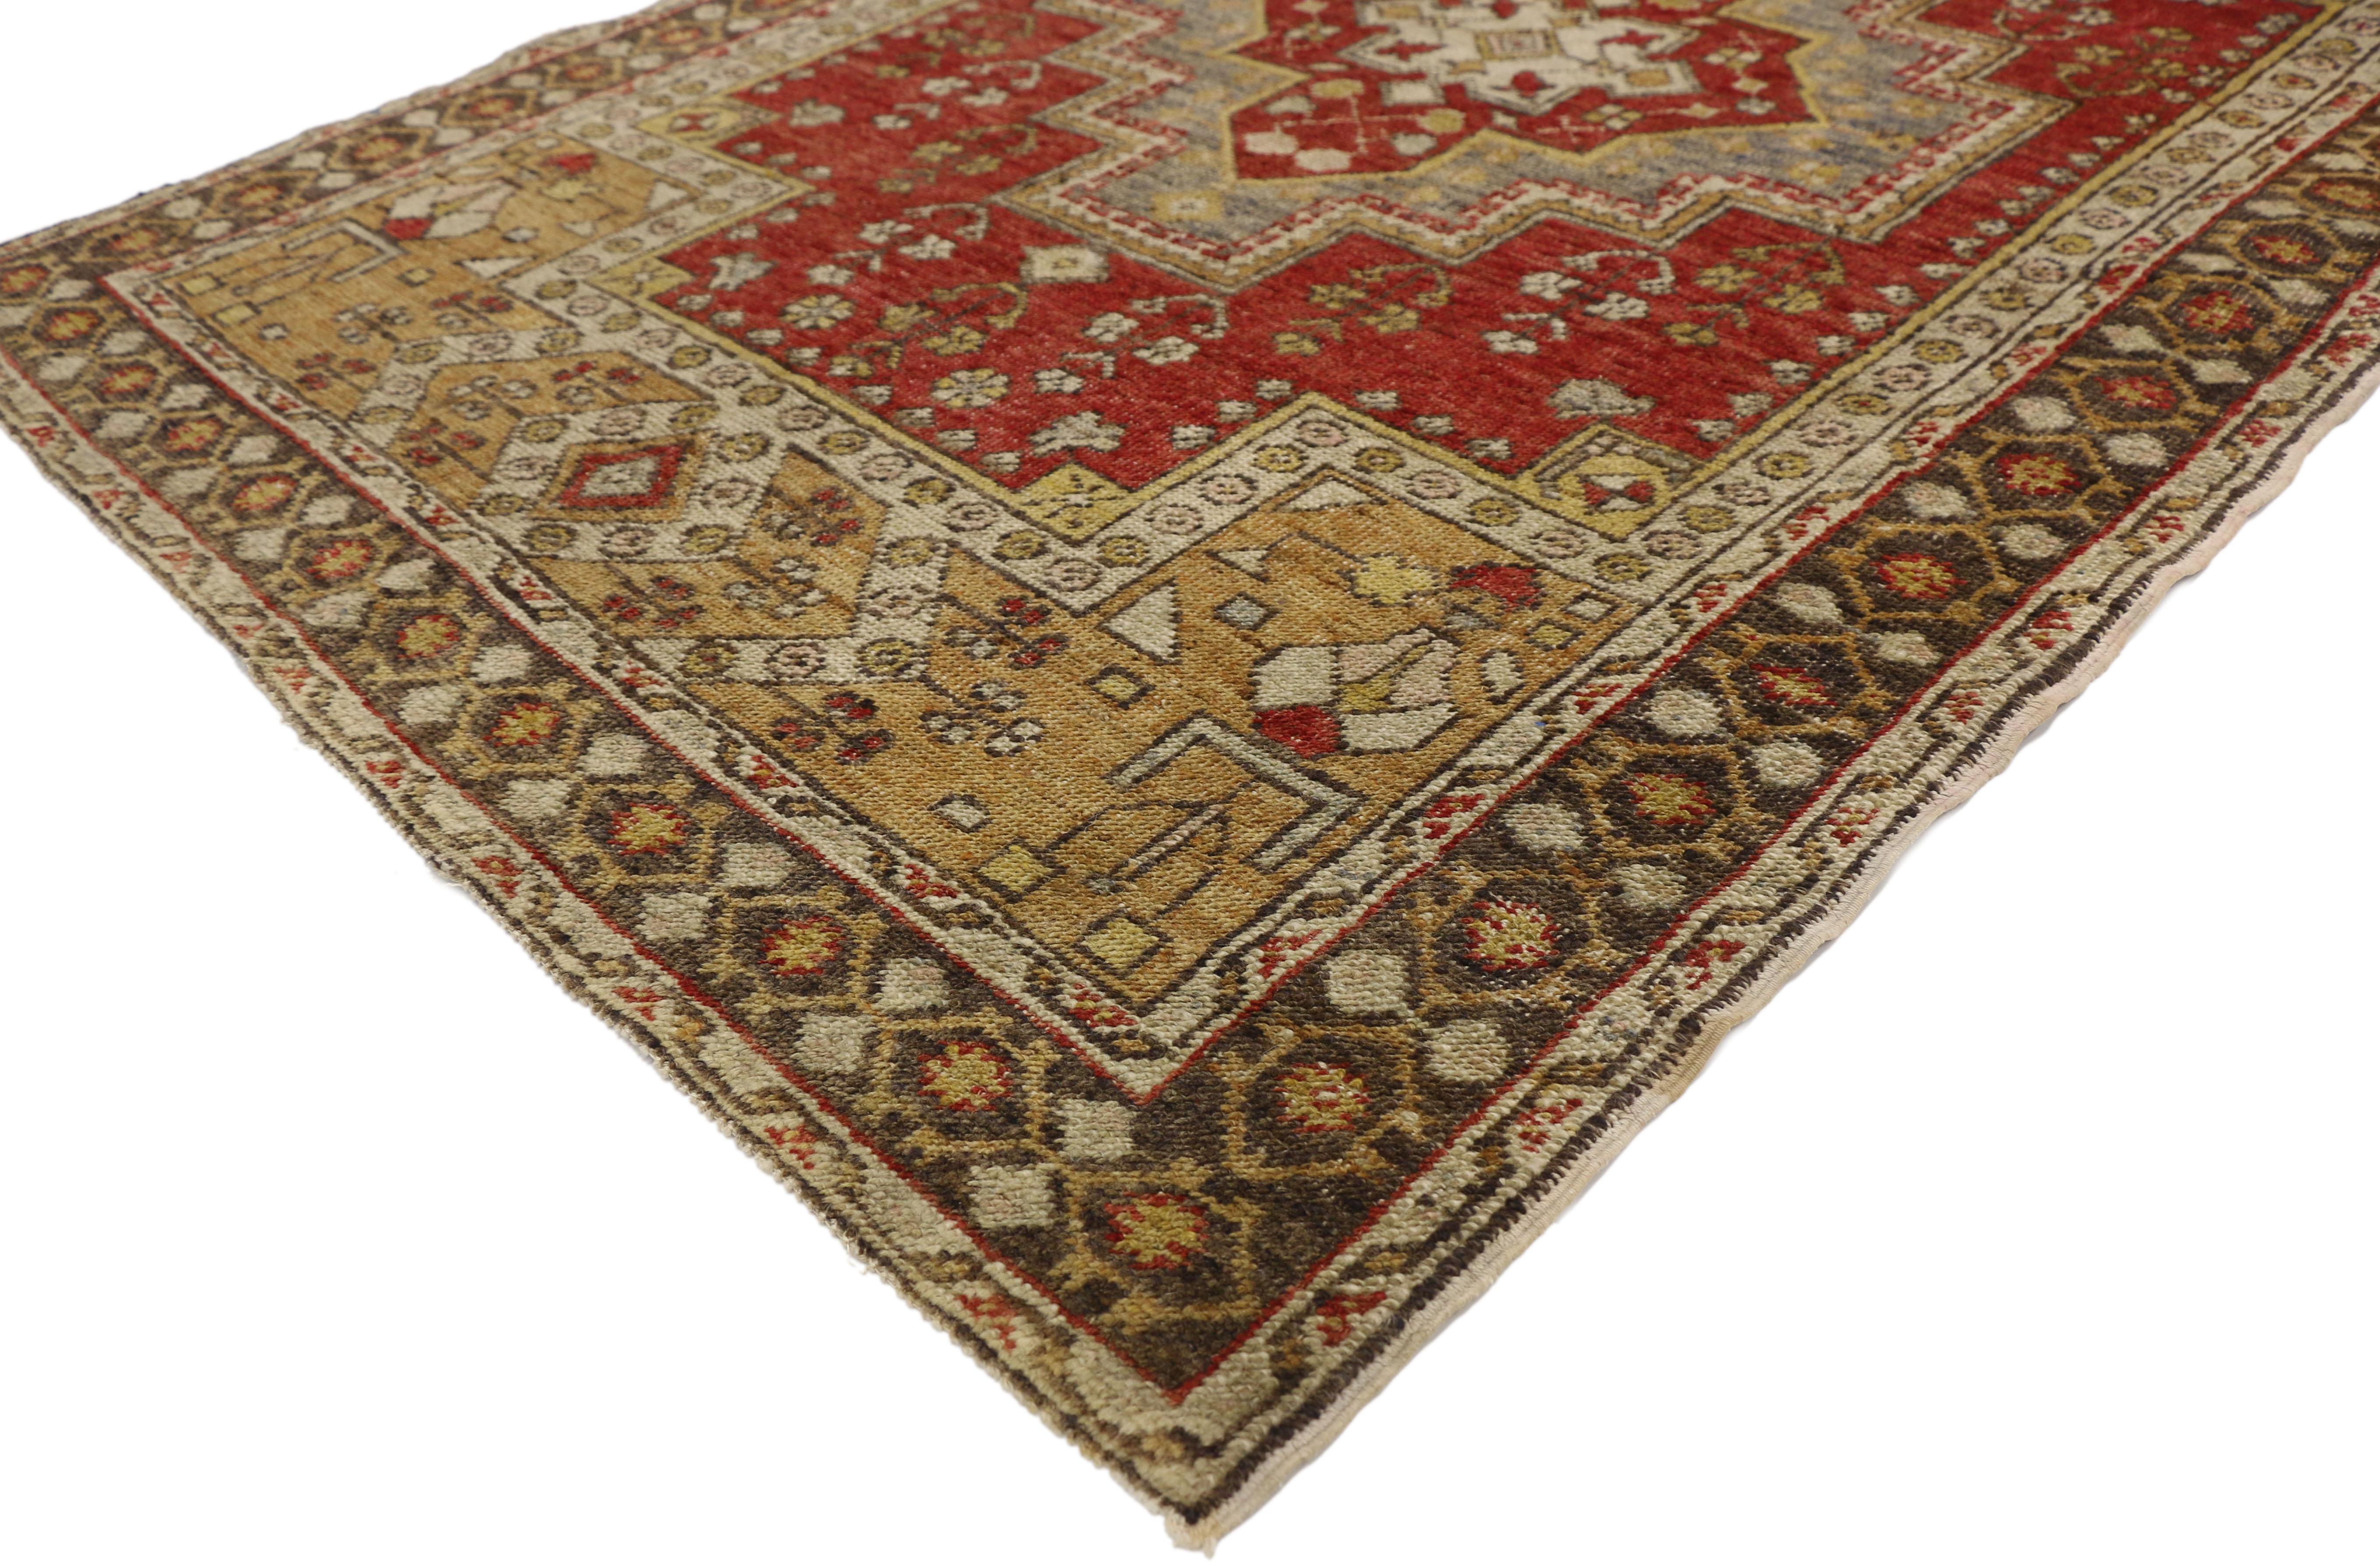 77281, vintage Turkish Oushak rug for entry, kitchen, foyer, or bathroom. This hand knotted wool vintage Turkish Oushak rug features a stepped medallion filled with a cruciform cross-like motif. The stepped central medallion is surrounded by floral